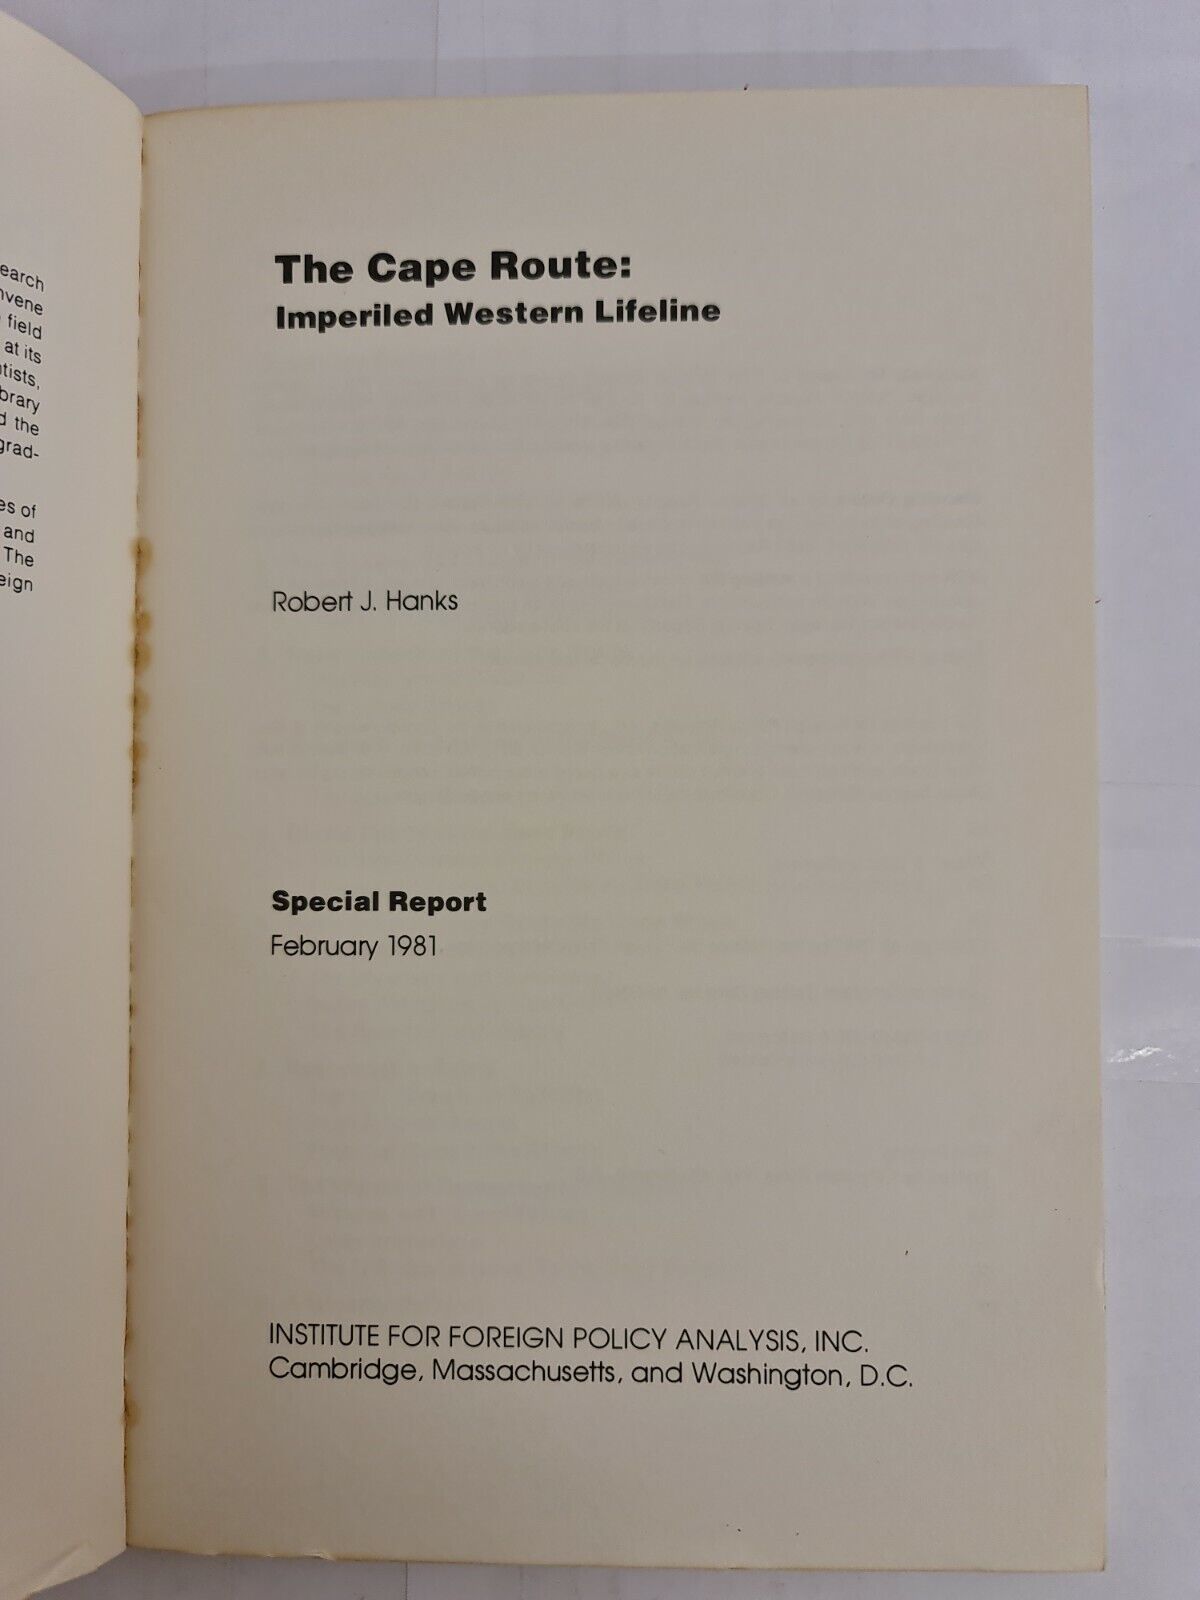 The Cape Route: Imperiled Western Lifeline by Robert Hanks (1981)